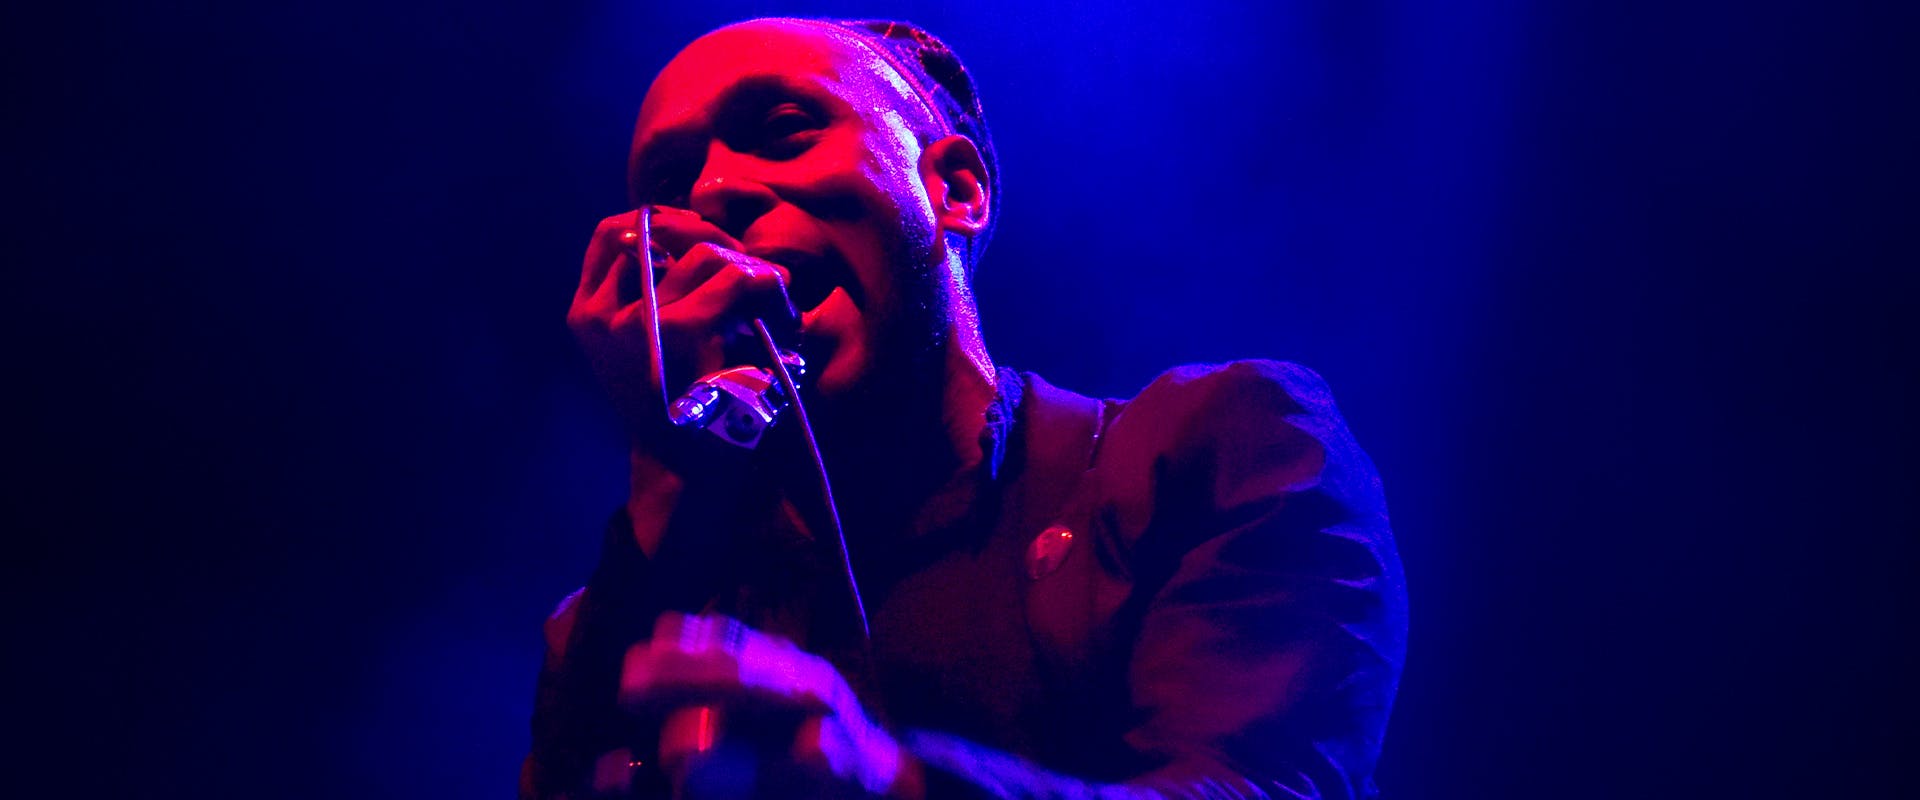 Yasiin Bey won't play Thelonious Monk in biopic since family disapproves